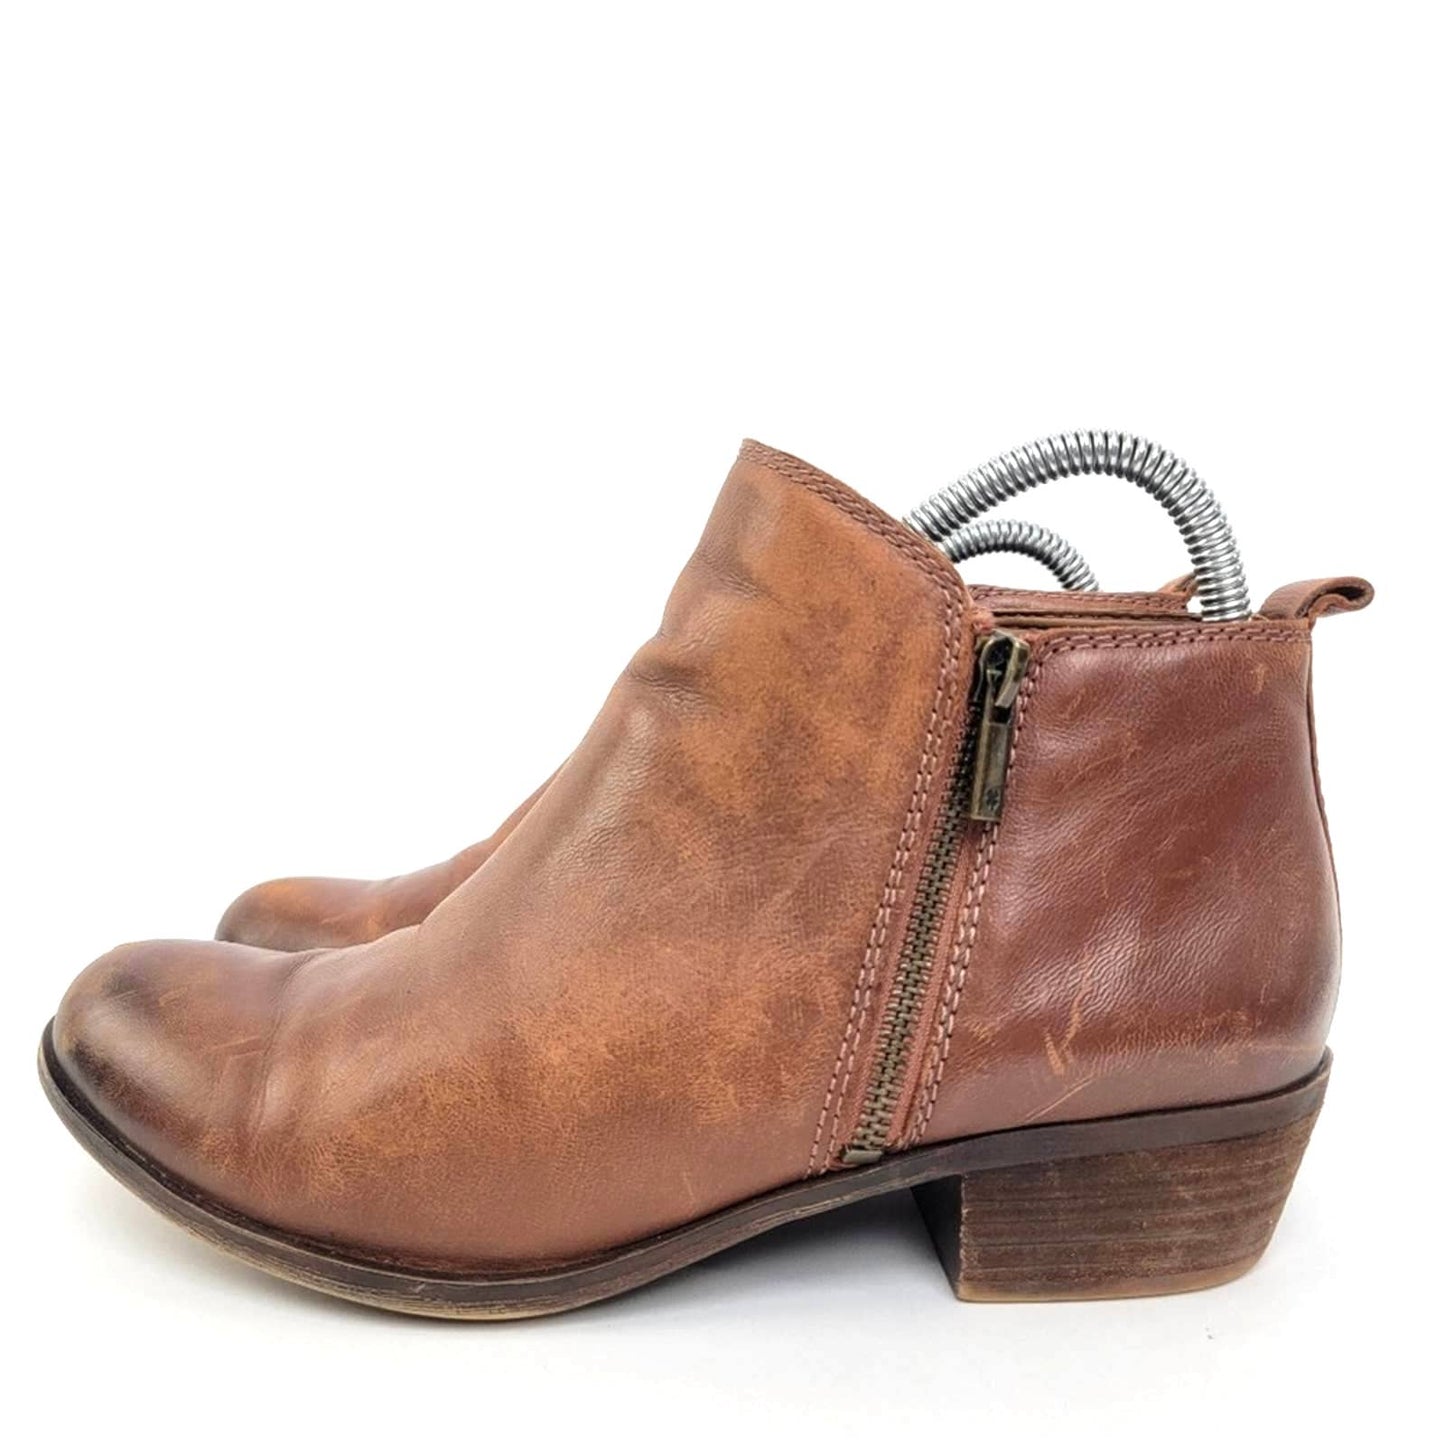 Lucky Brand Basel Bootie - Toffee - 9